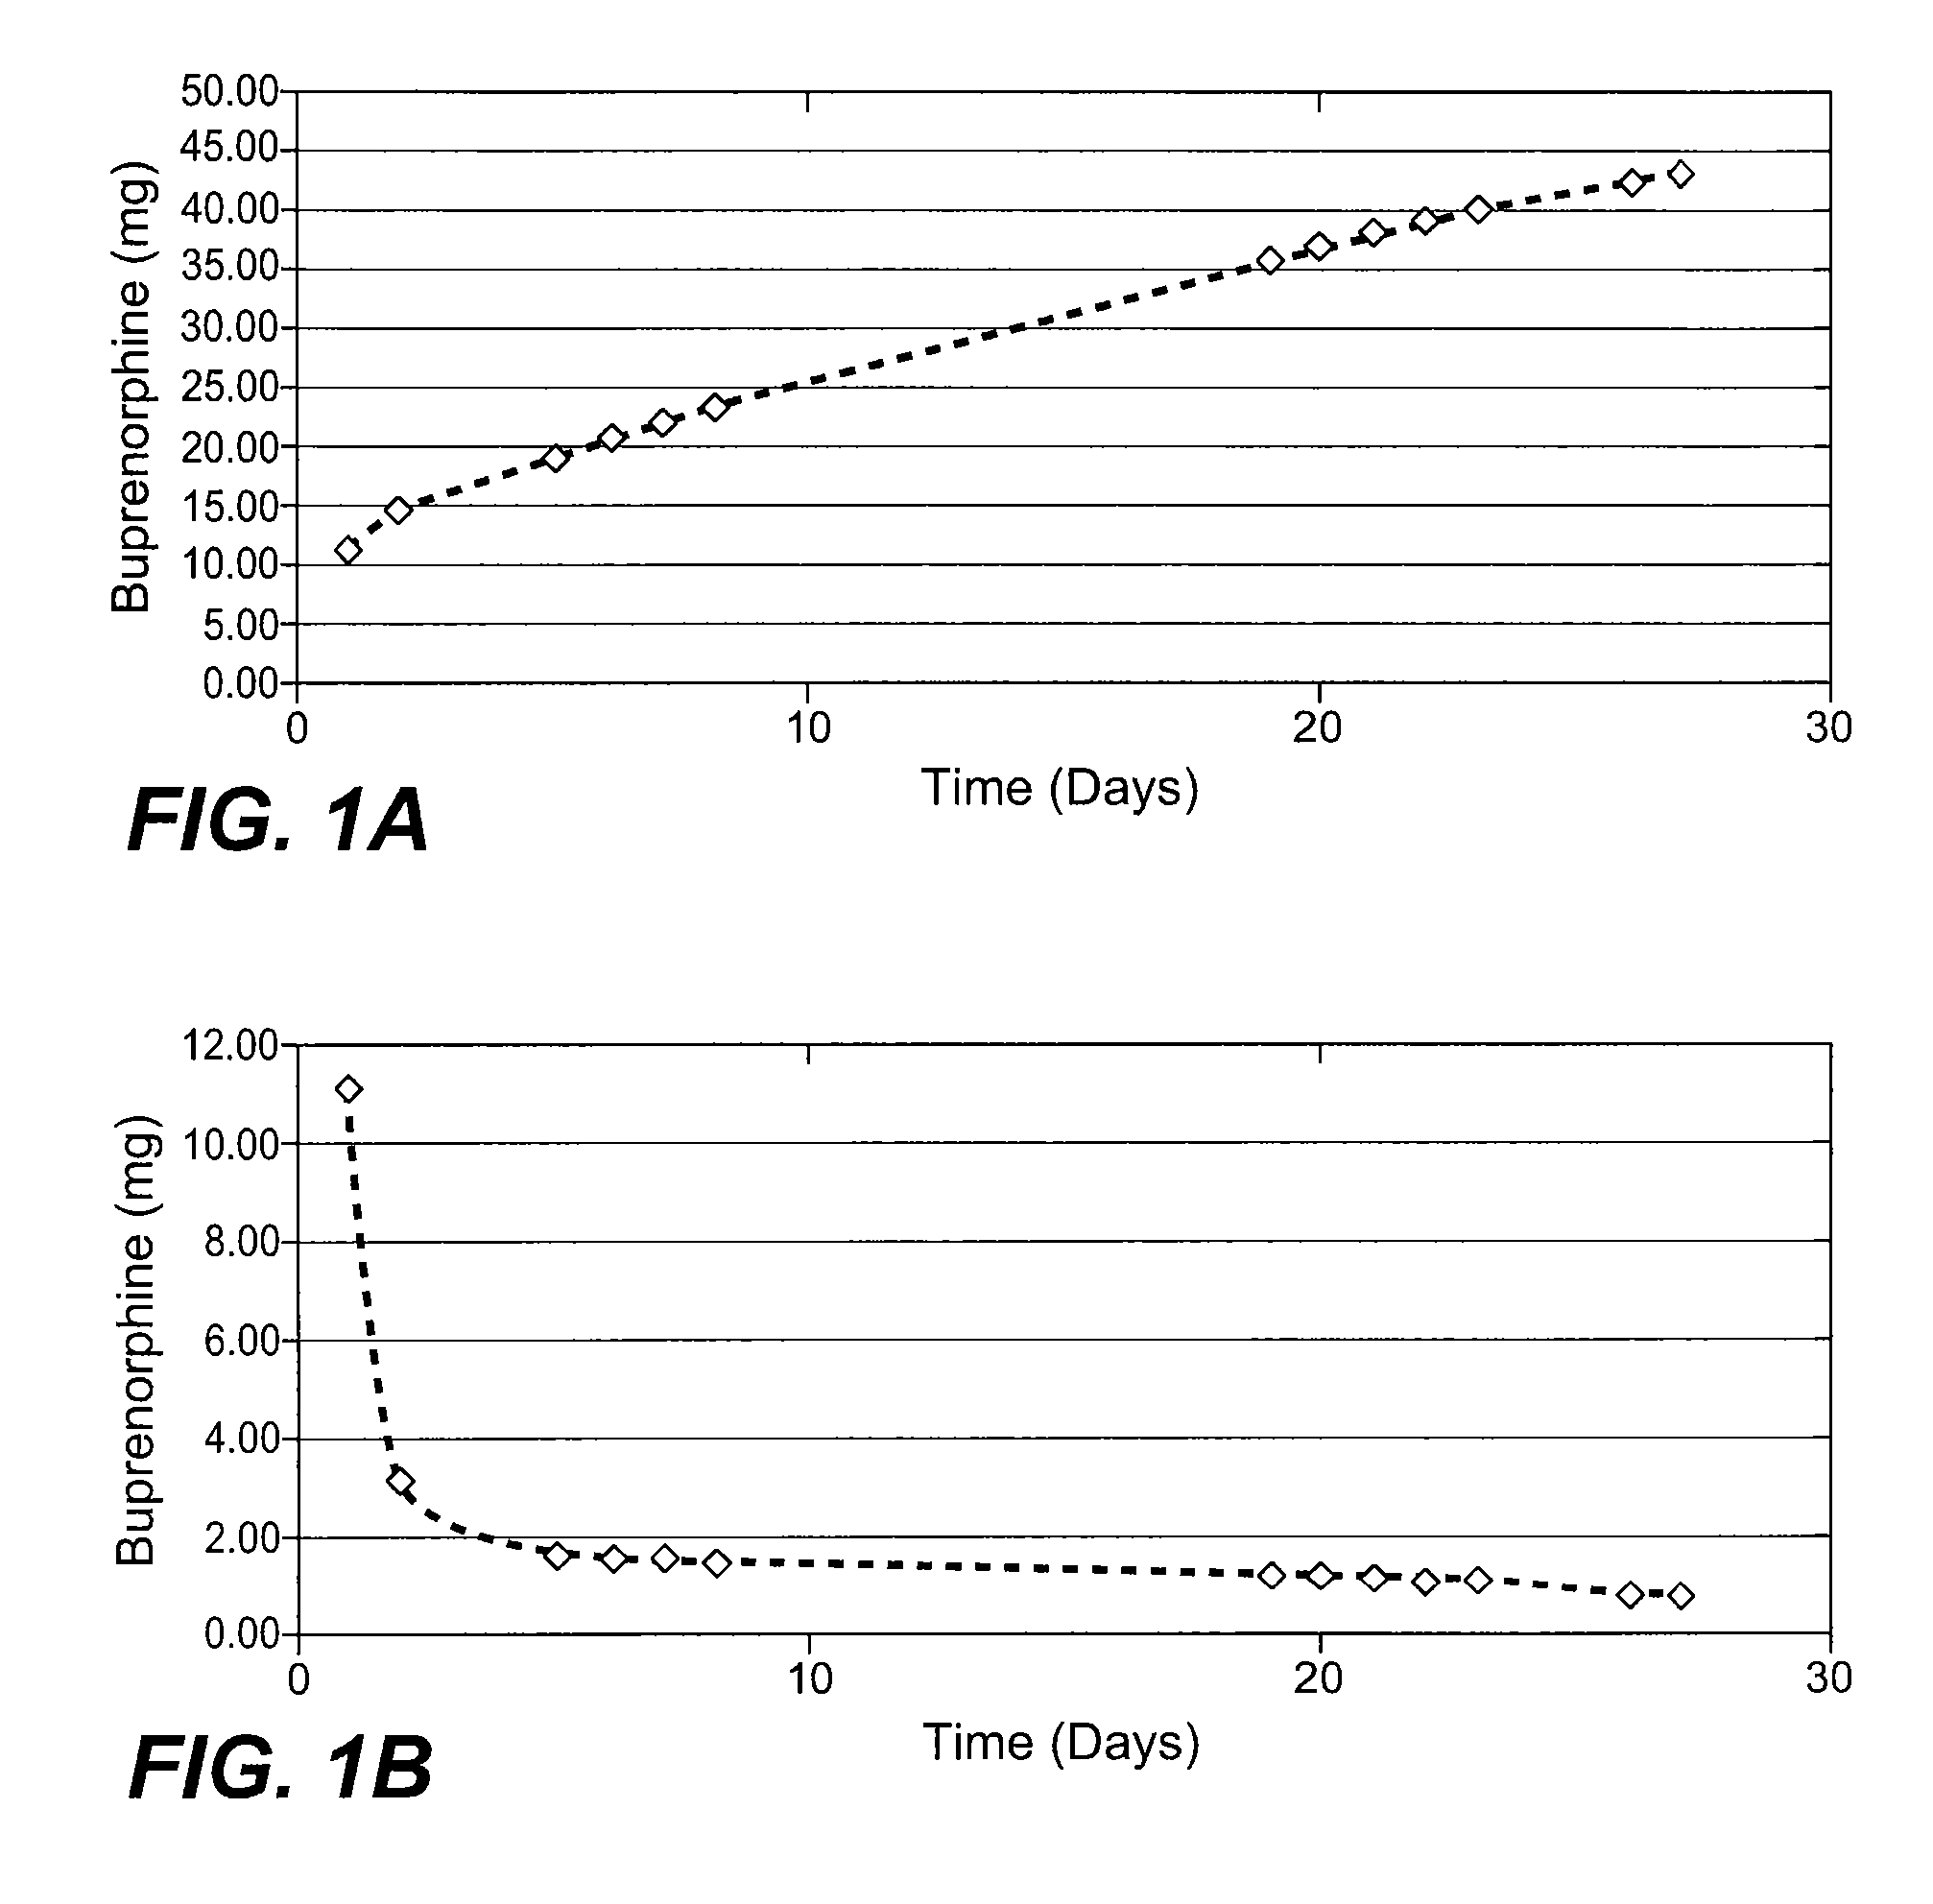 Implantable polymeric device for sustained release of buprenorphine